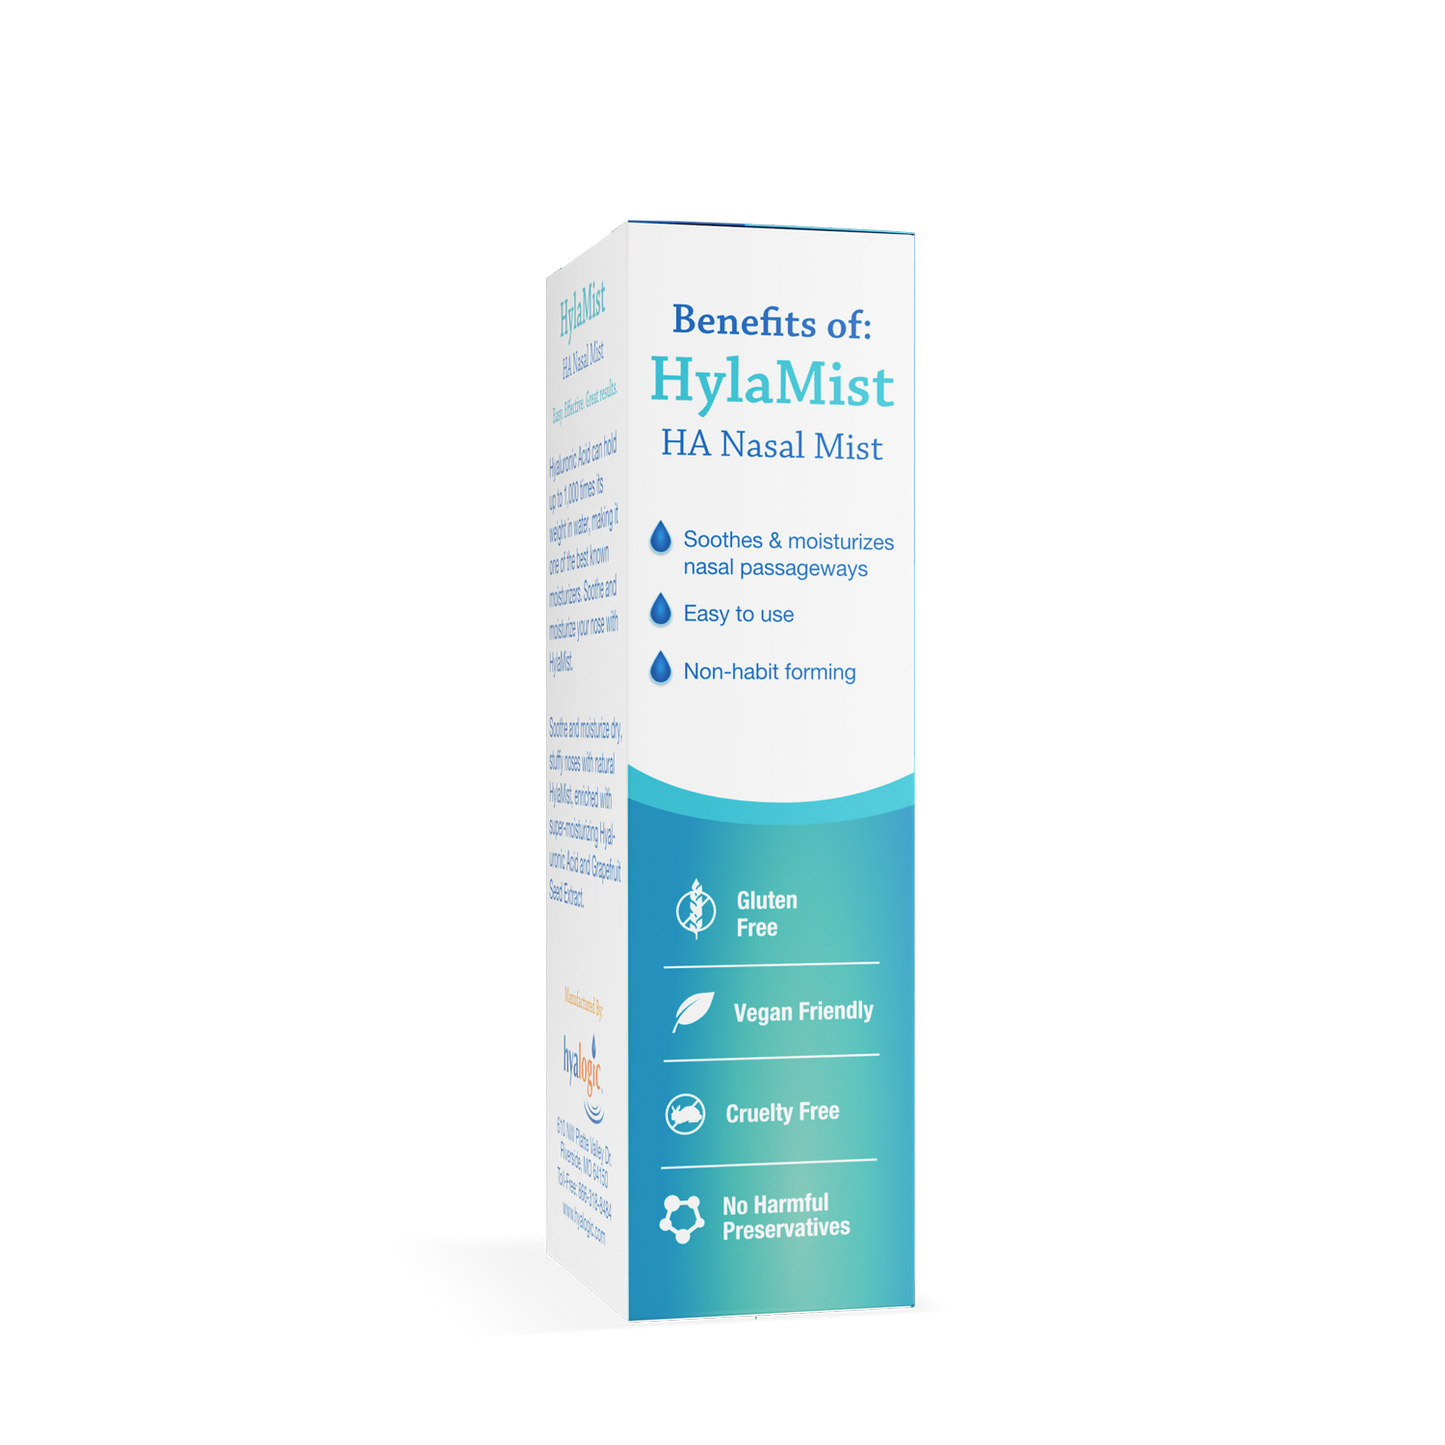 HylaMist™ for Dry Nose